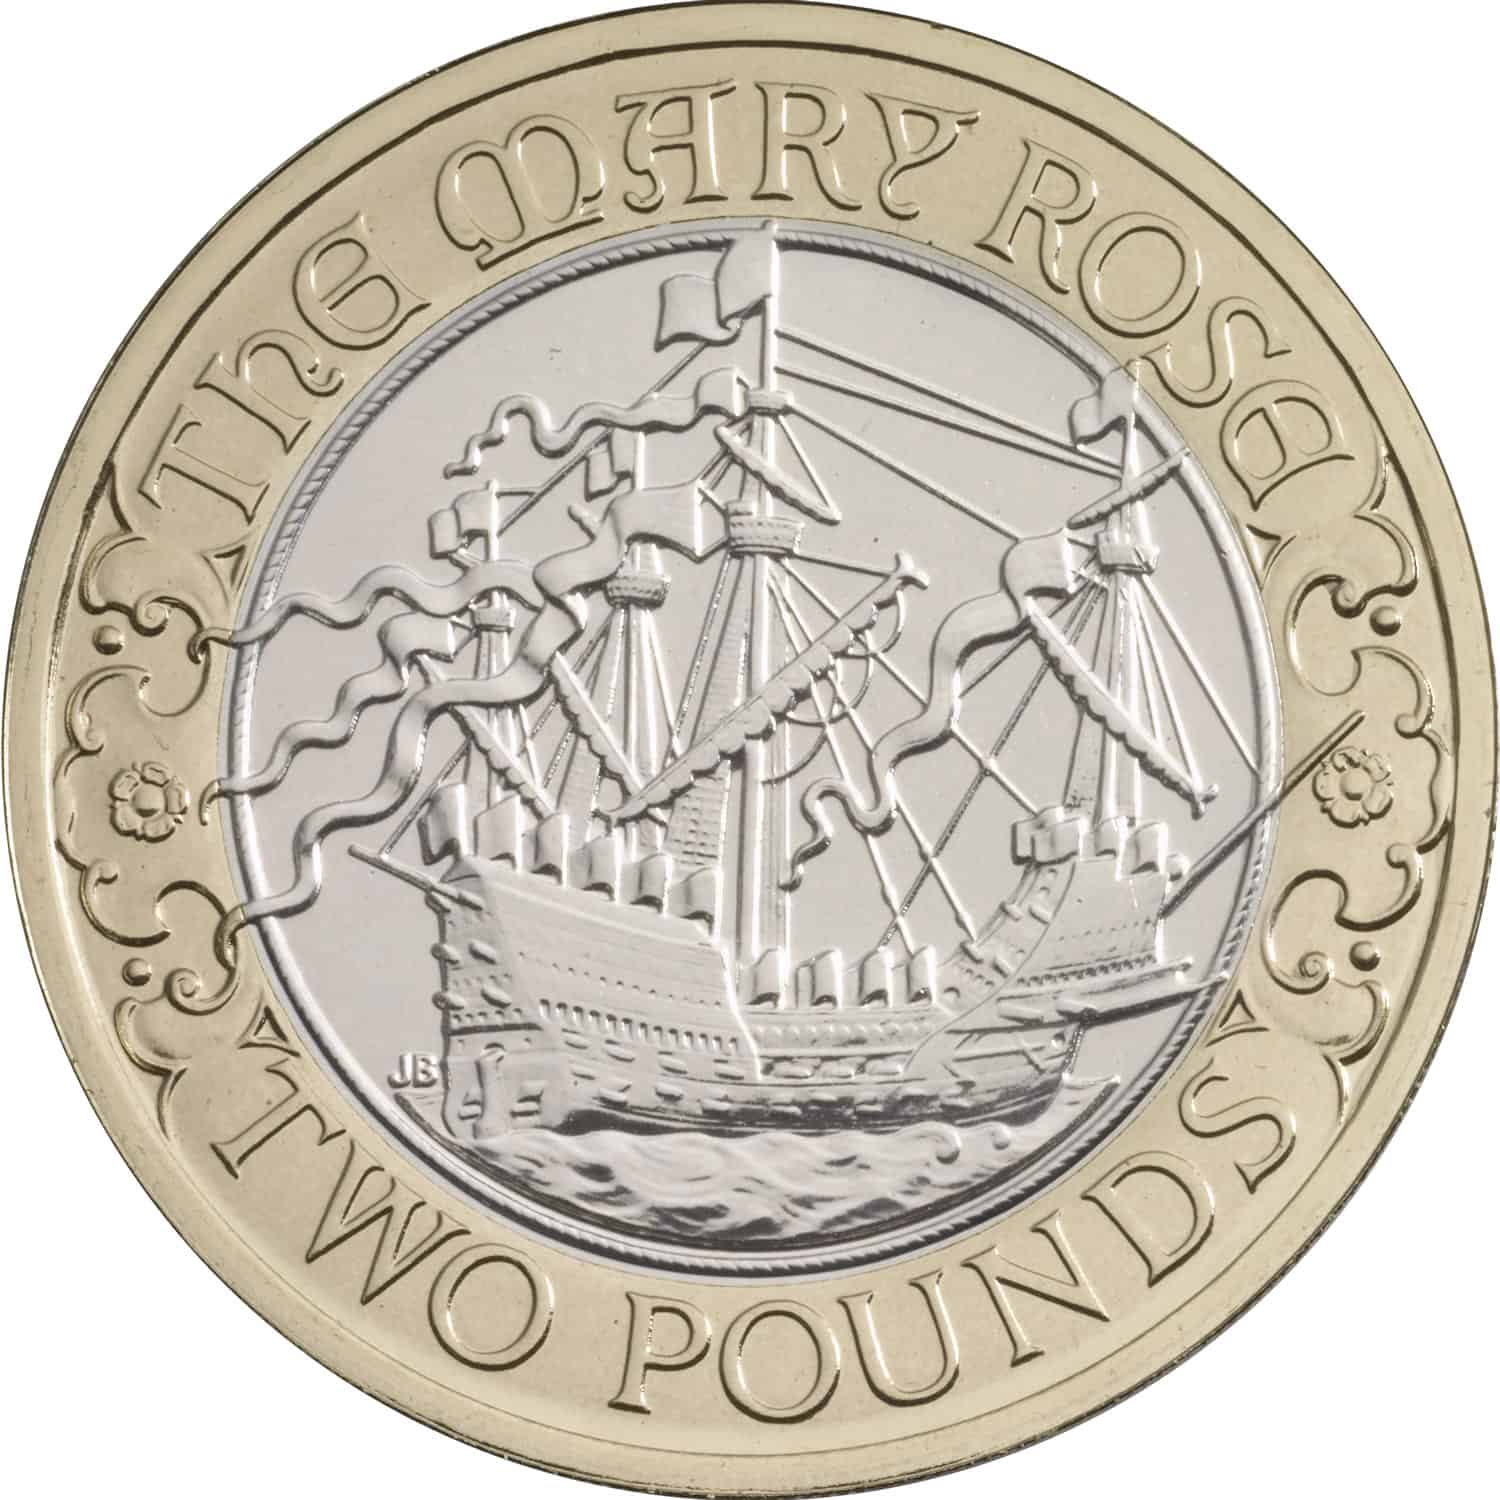 Mary Rose £2 Coin | CostlyCoins